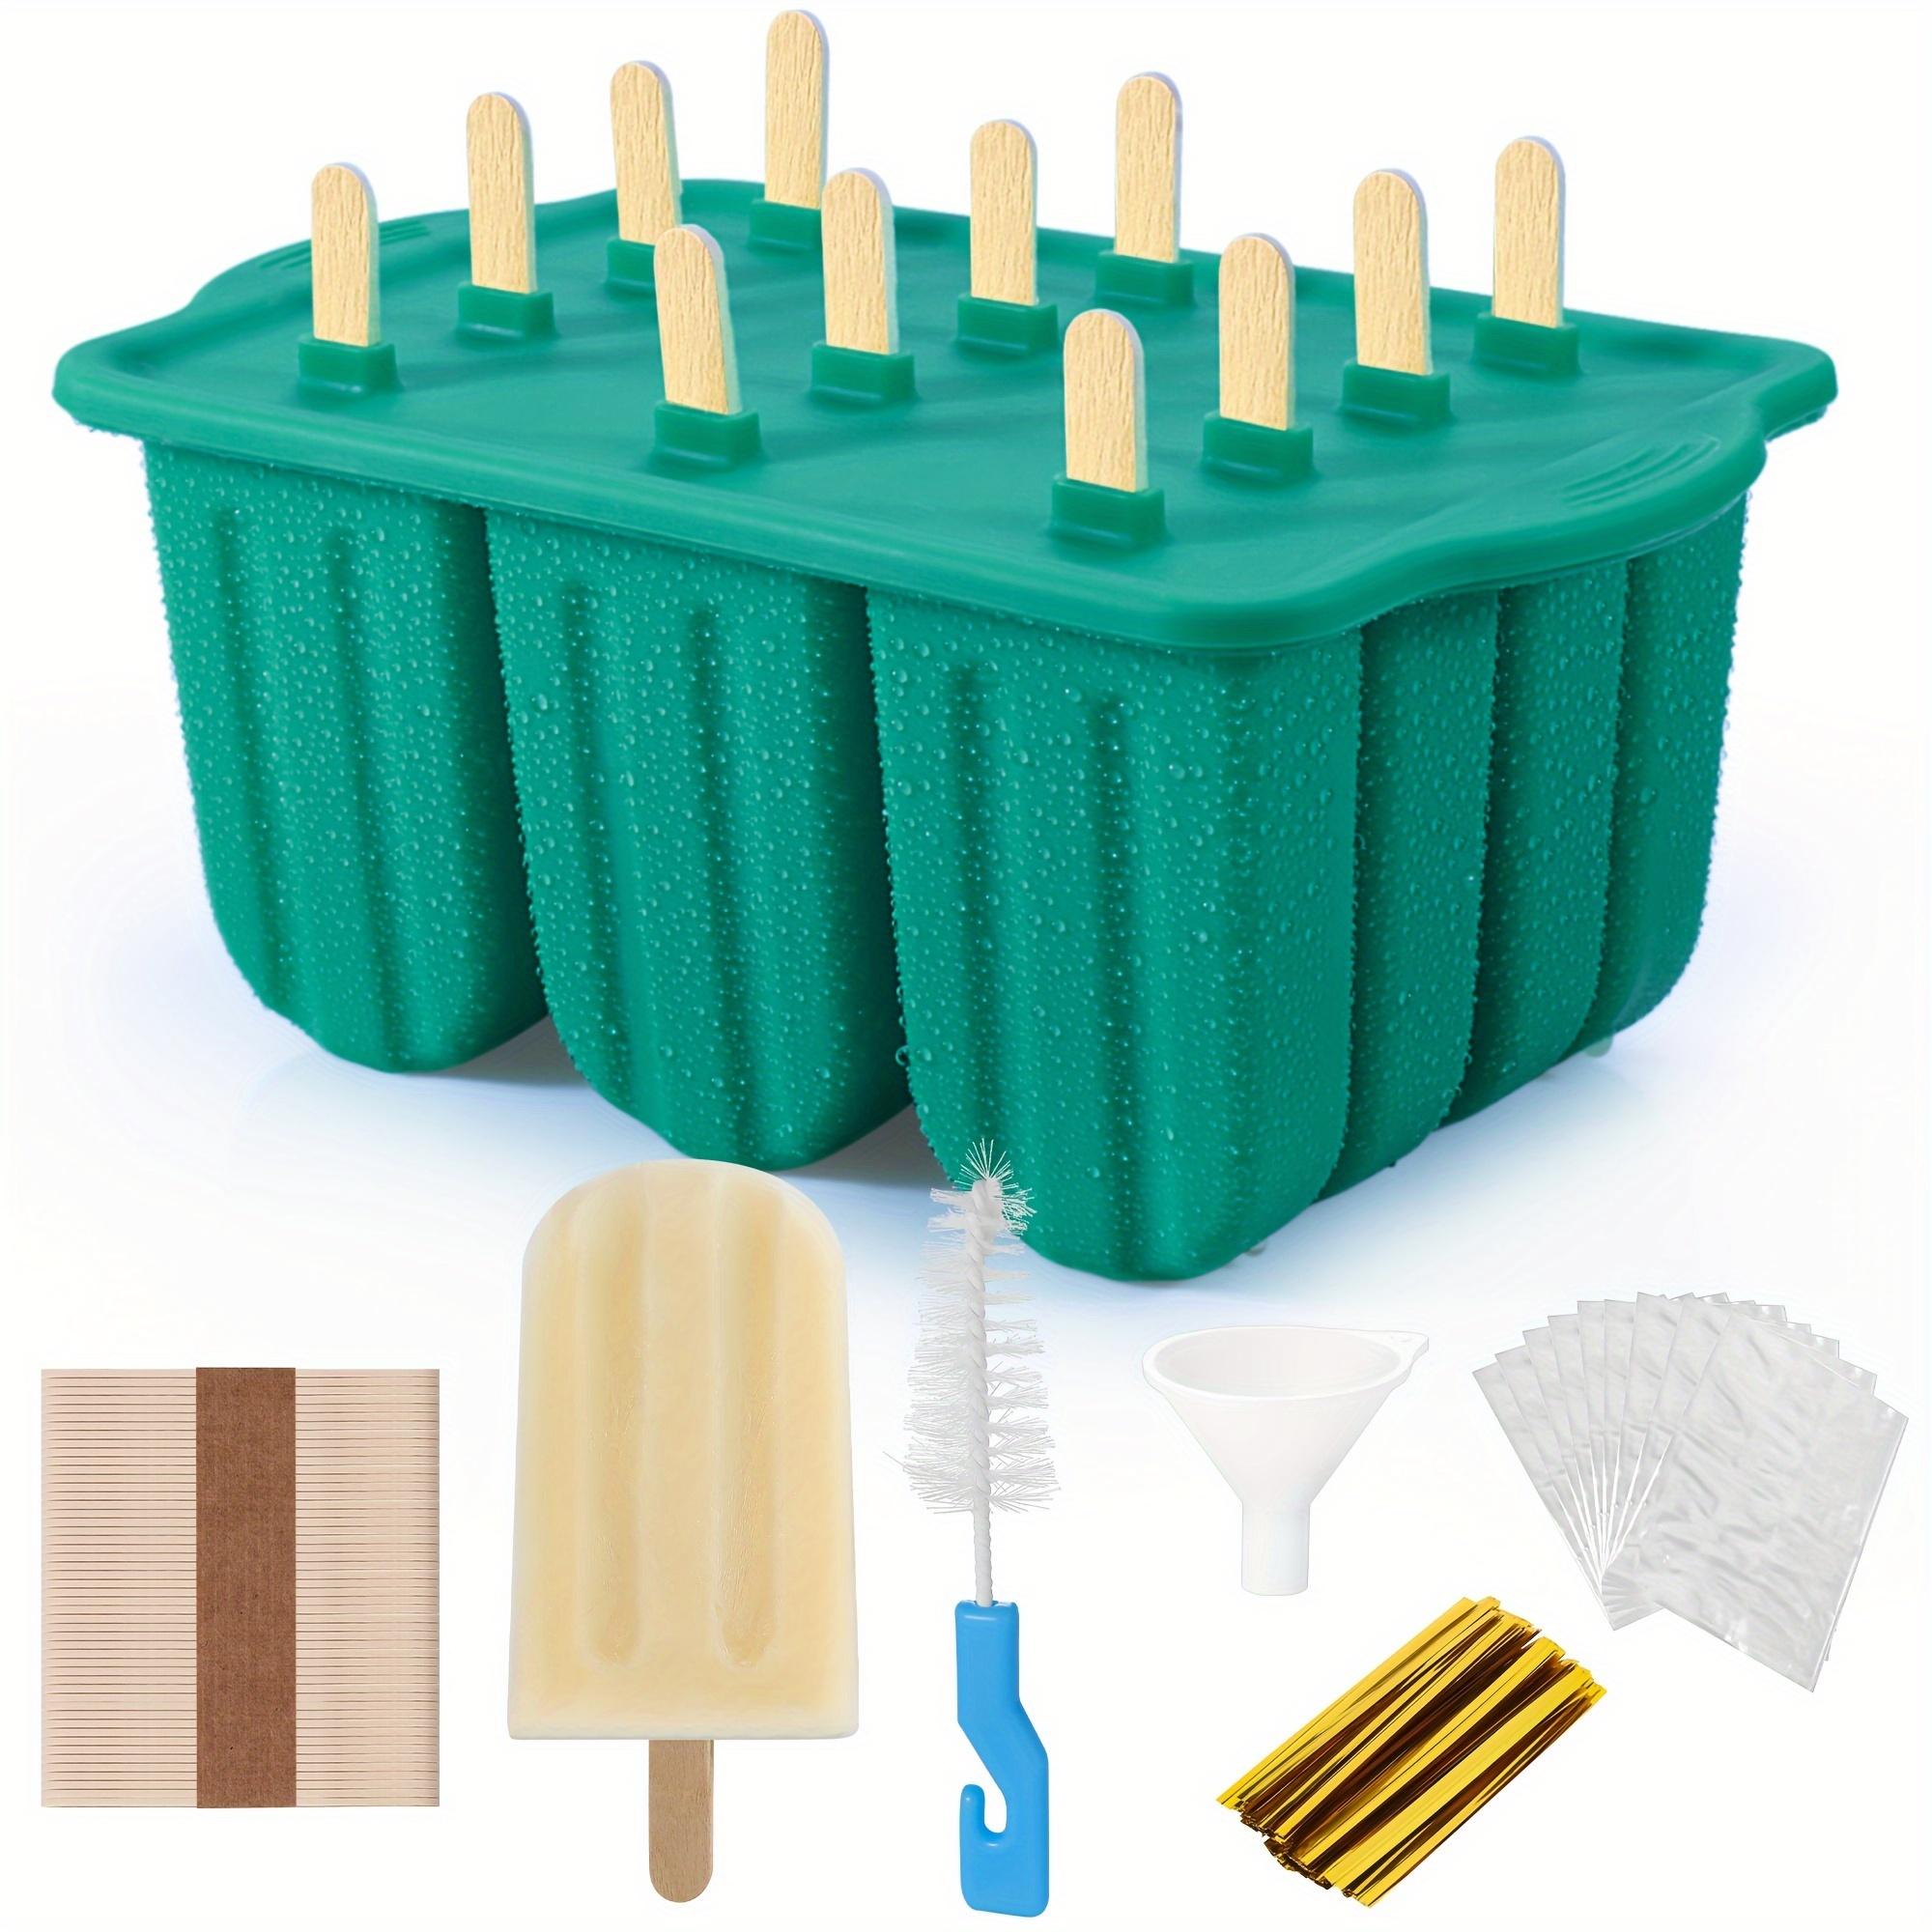 Silicone Popsicle Molds Easy-release Bpa-free Popsicle Maker Molds